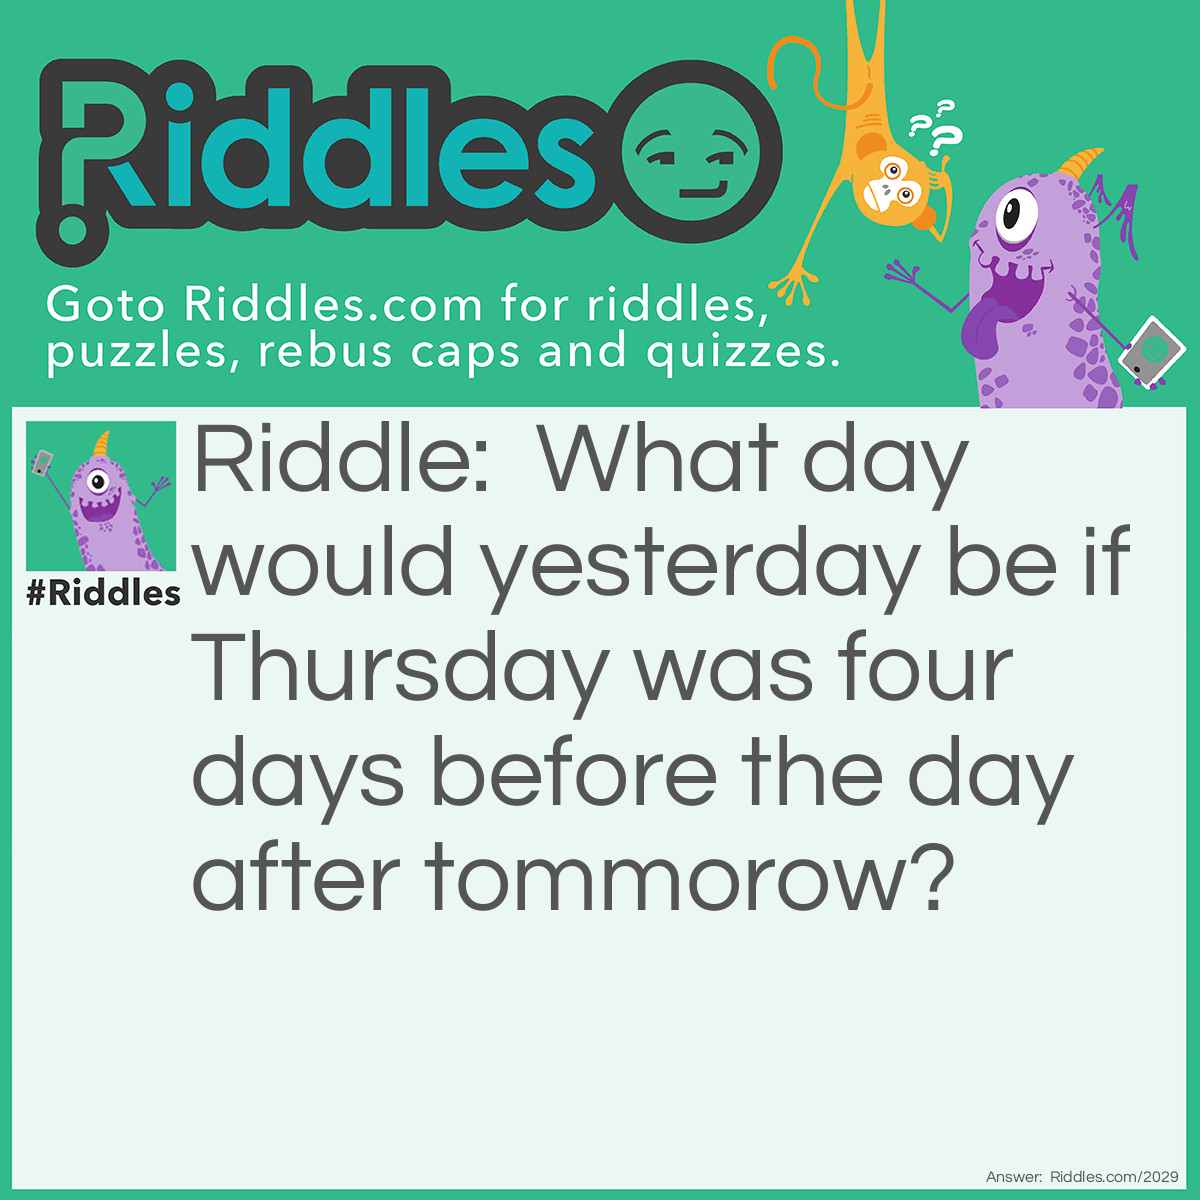 Riddle: What day would yesterday be if Thursday was four days before the day after tomorrow? Answer: Friday.